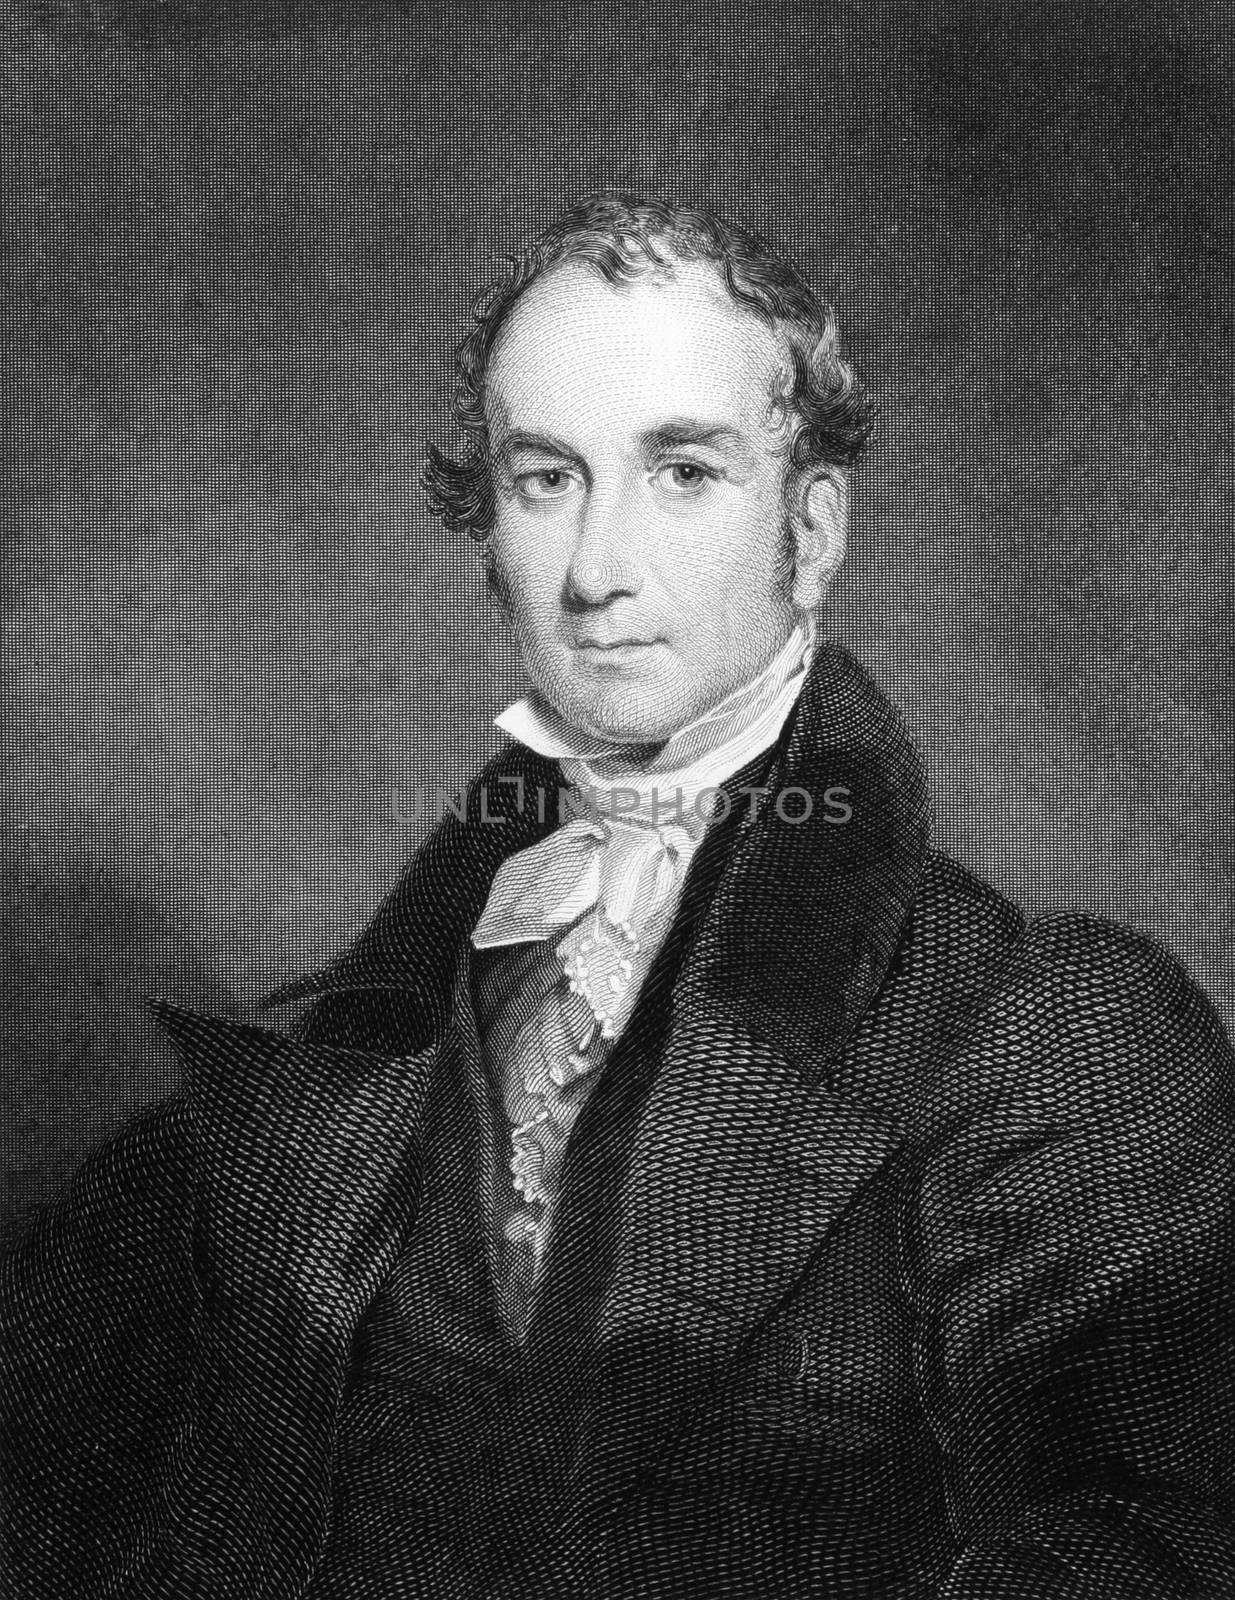 Louis McLane (1786-1857) on engraving from 1834. American lawyer and politician. Engraved by T.Kelly and published in ''National Portrait Gallery of Distinguished Americans'',USA,1834.